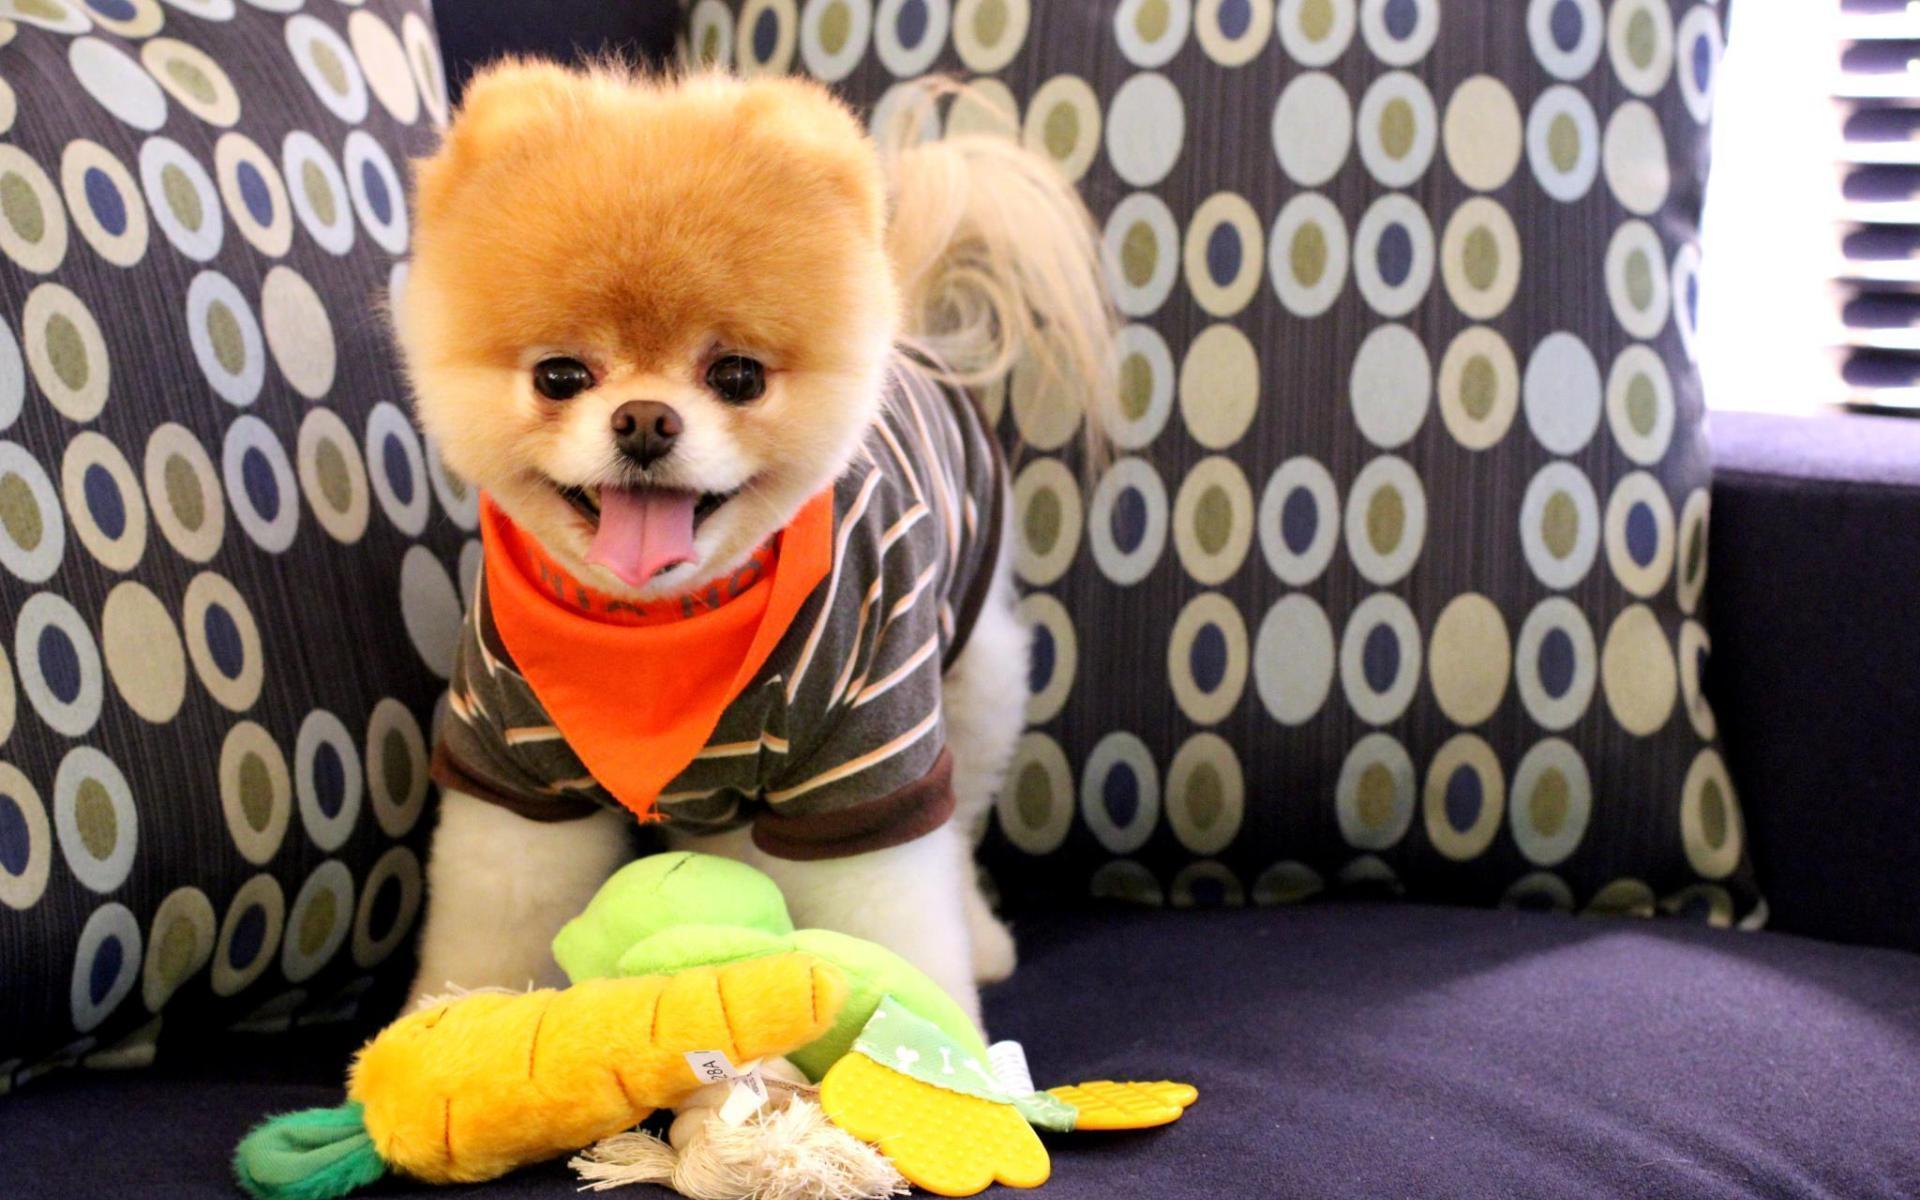 boo the cutest dog wallpaper Search Engine